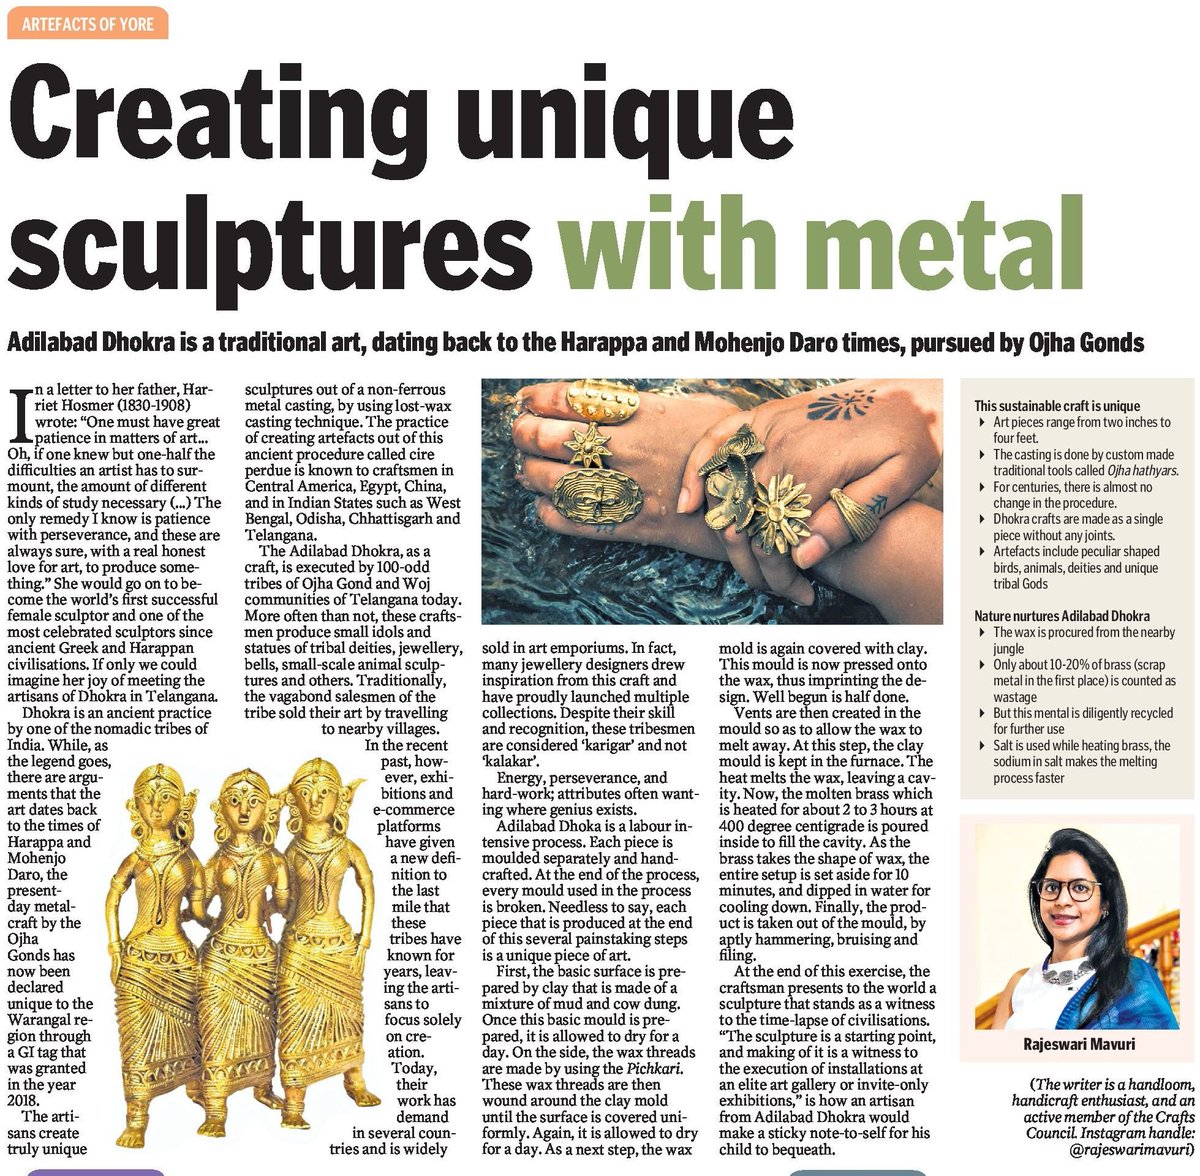 #Adilabad #Dhokra is a traditional #Art, dating back to the Harappa & Mohenjo Daro times, being pursued by the Ojha Gonds & Woj tribal communities living in our #Telangana State, in the @Collector_ADB District
🌱
Report by: Smt.Rajeswari Mavuri
#DiscoverTelangana #LivingHeritage